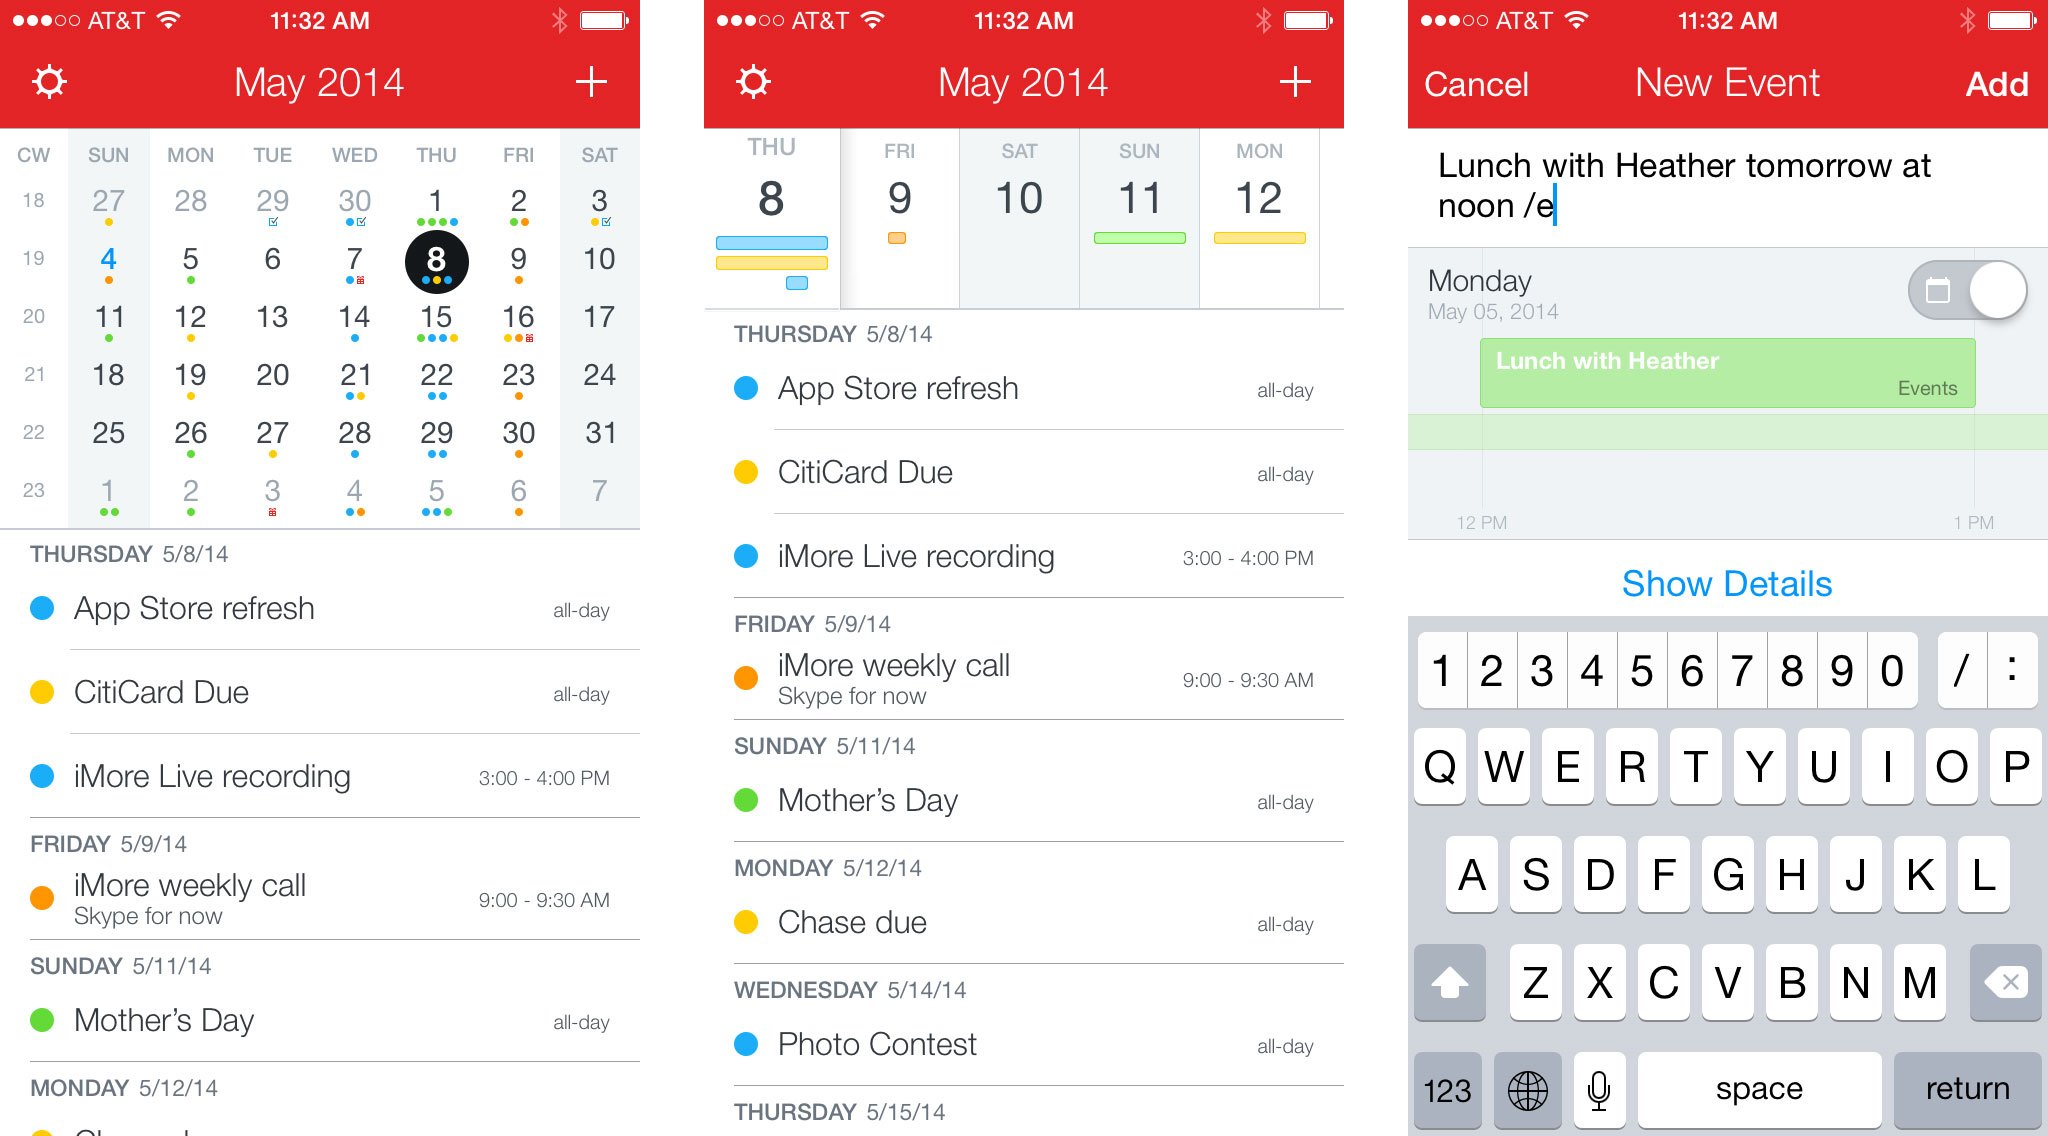 Best iPhone apps for contractors: Fantastical 2